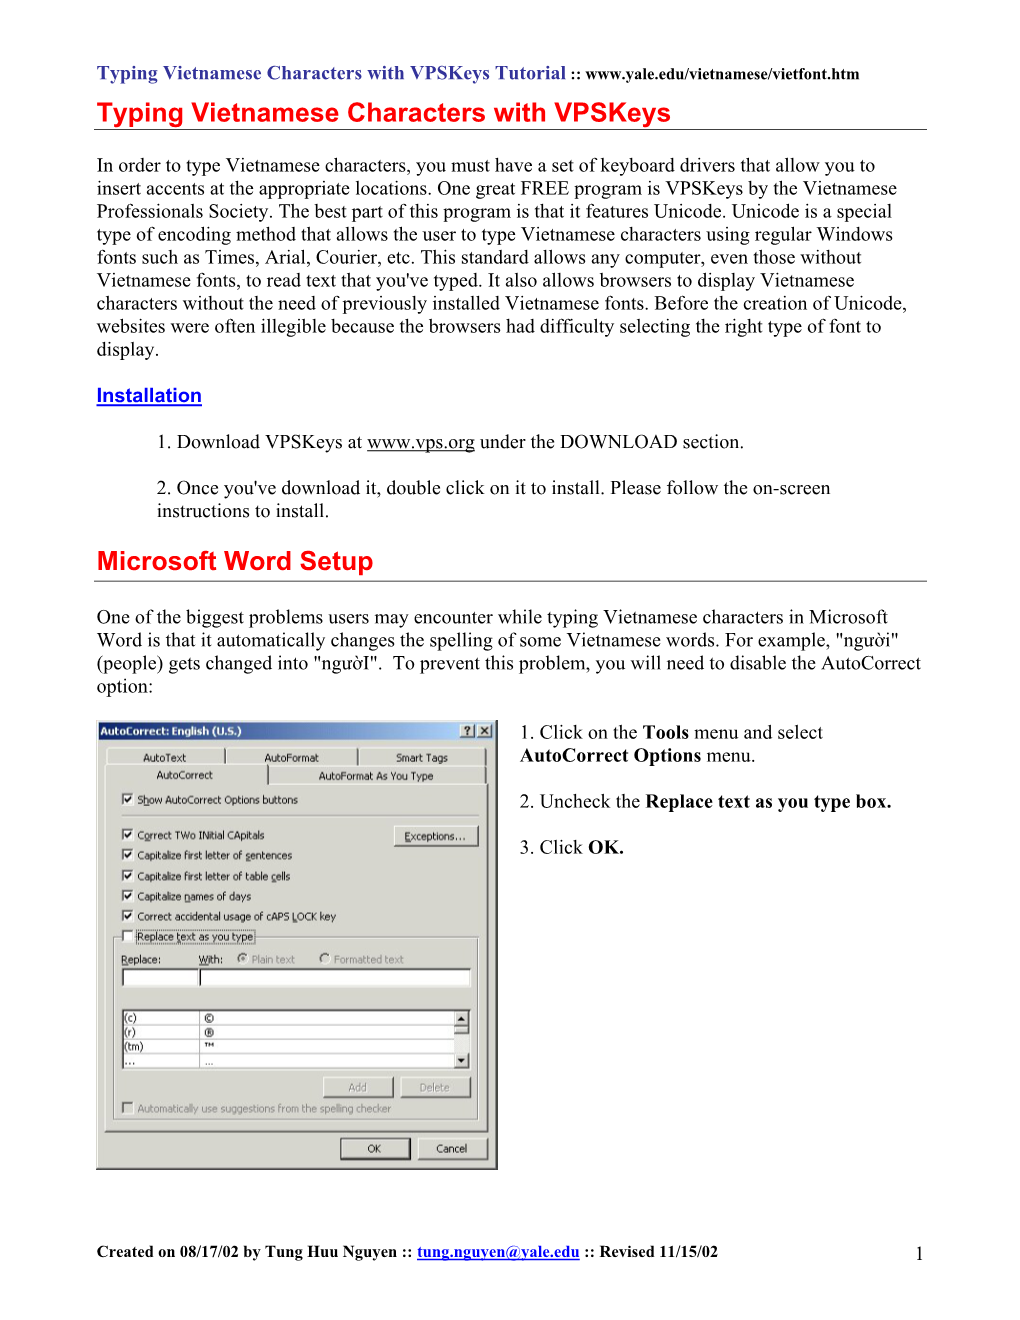 Typing Vietnamese Characters with Vpskeys Microsoft Word Setup